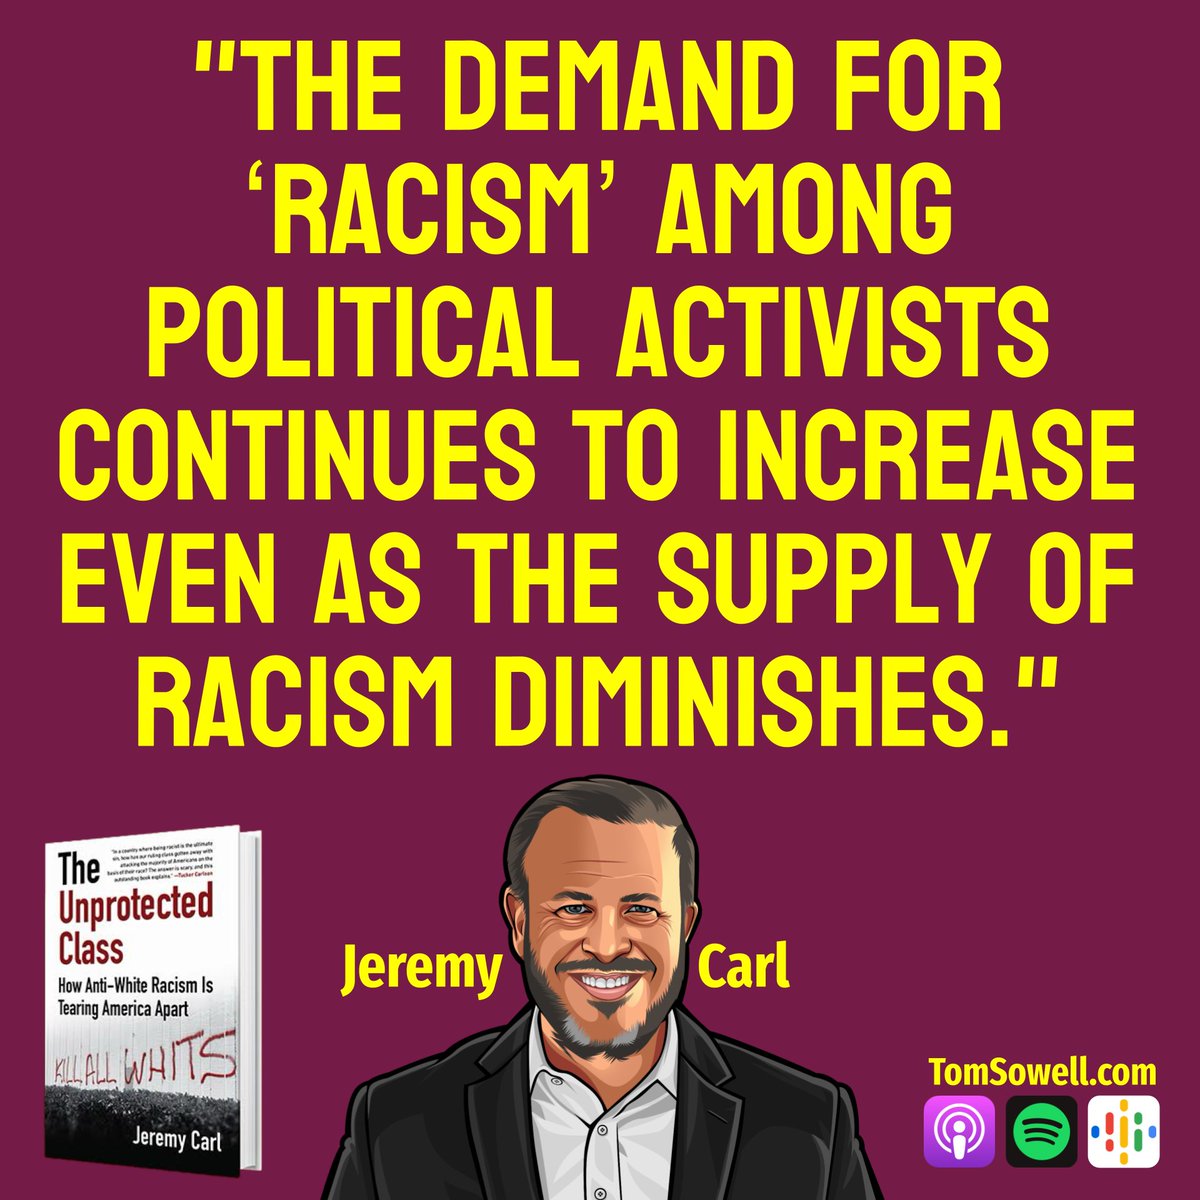 'Racism is not dead, but it is on life support - kept alive by politicians, race hustlers and people who get a sense of superiority by denouncing others as 'racists.'' Thomas Sowell From @realJeremyCarl's new book, coming out this week.